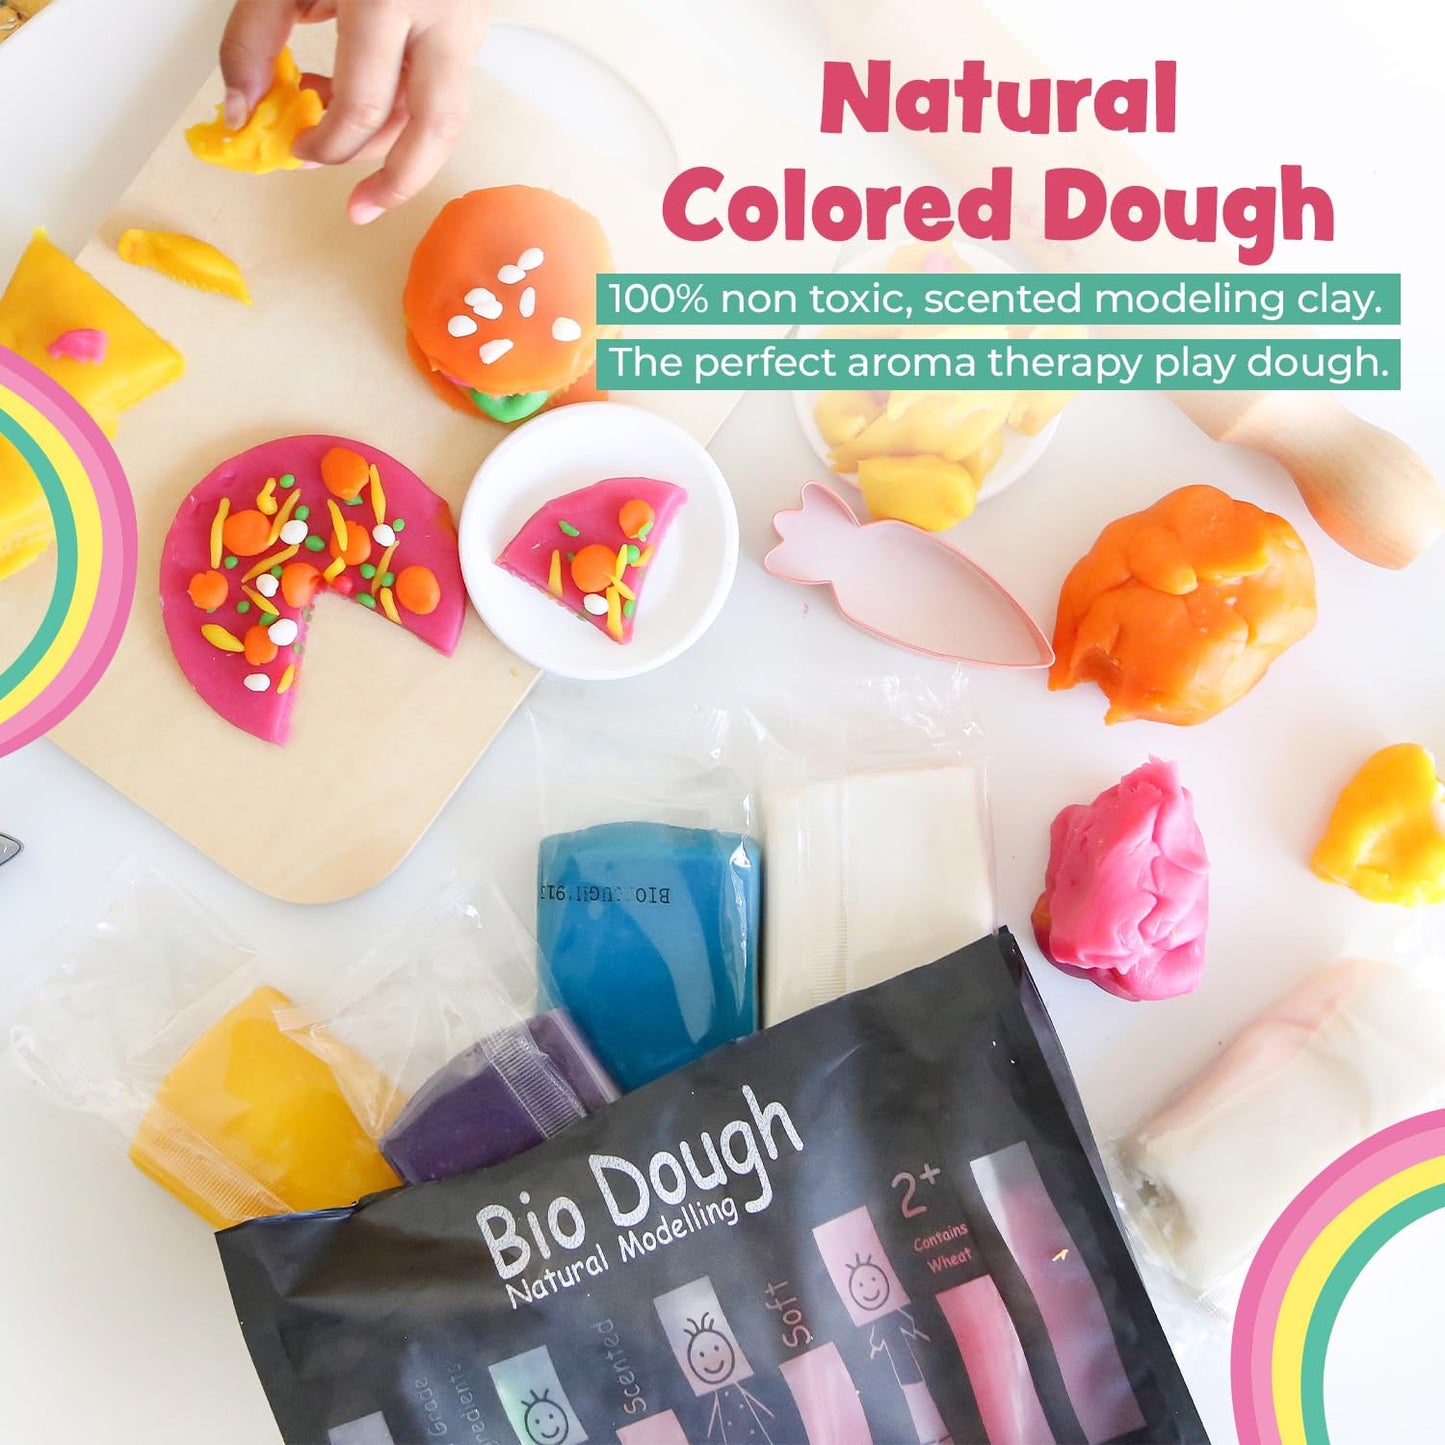 Bio DoUgh Natural Colored Dough - Australian Hand Made Modeling Dough for Kids, Scented Play, Reusable Arts and Crafts for Kids, Food Grade Ingredients, Non Toxic Dough, 9 Colors, 39.7oz